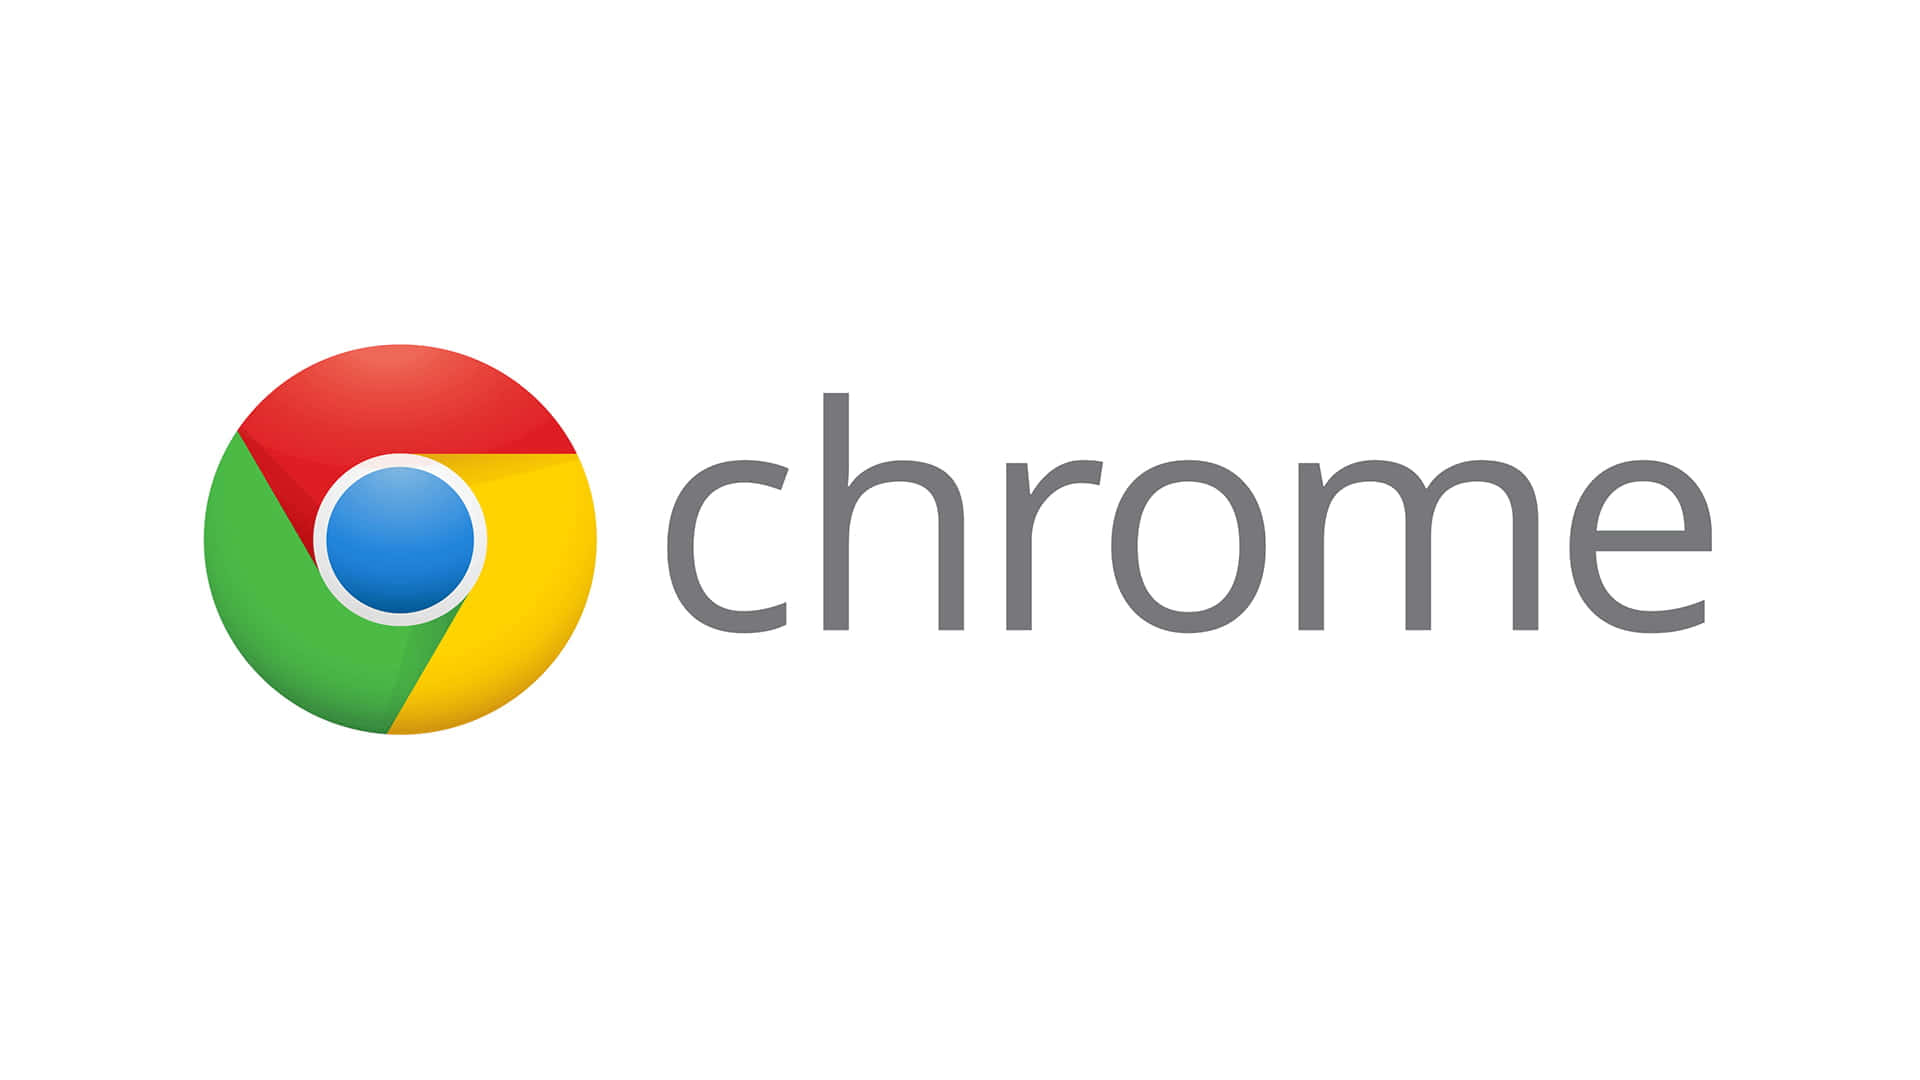 Get your day started with Google Chrome